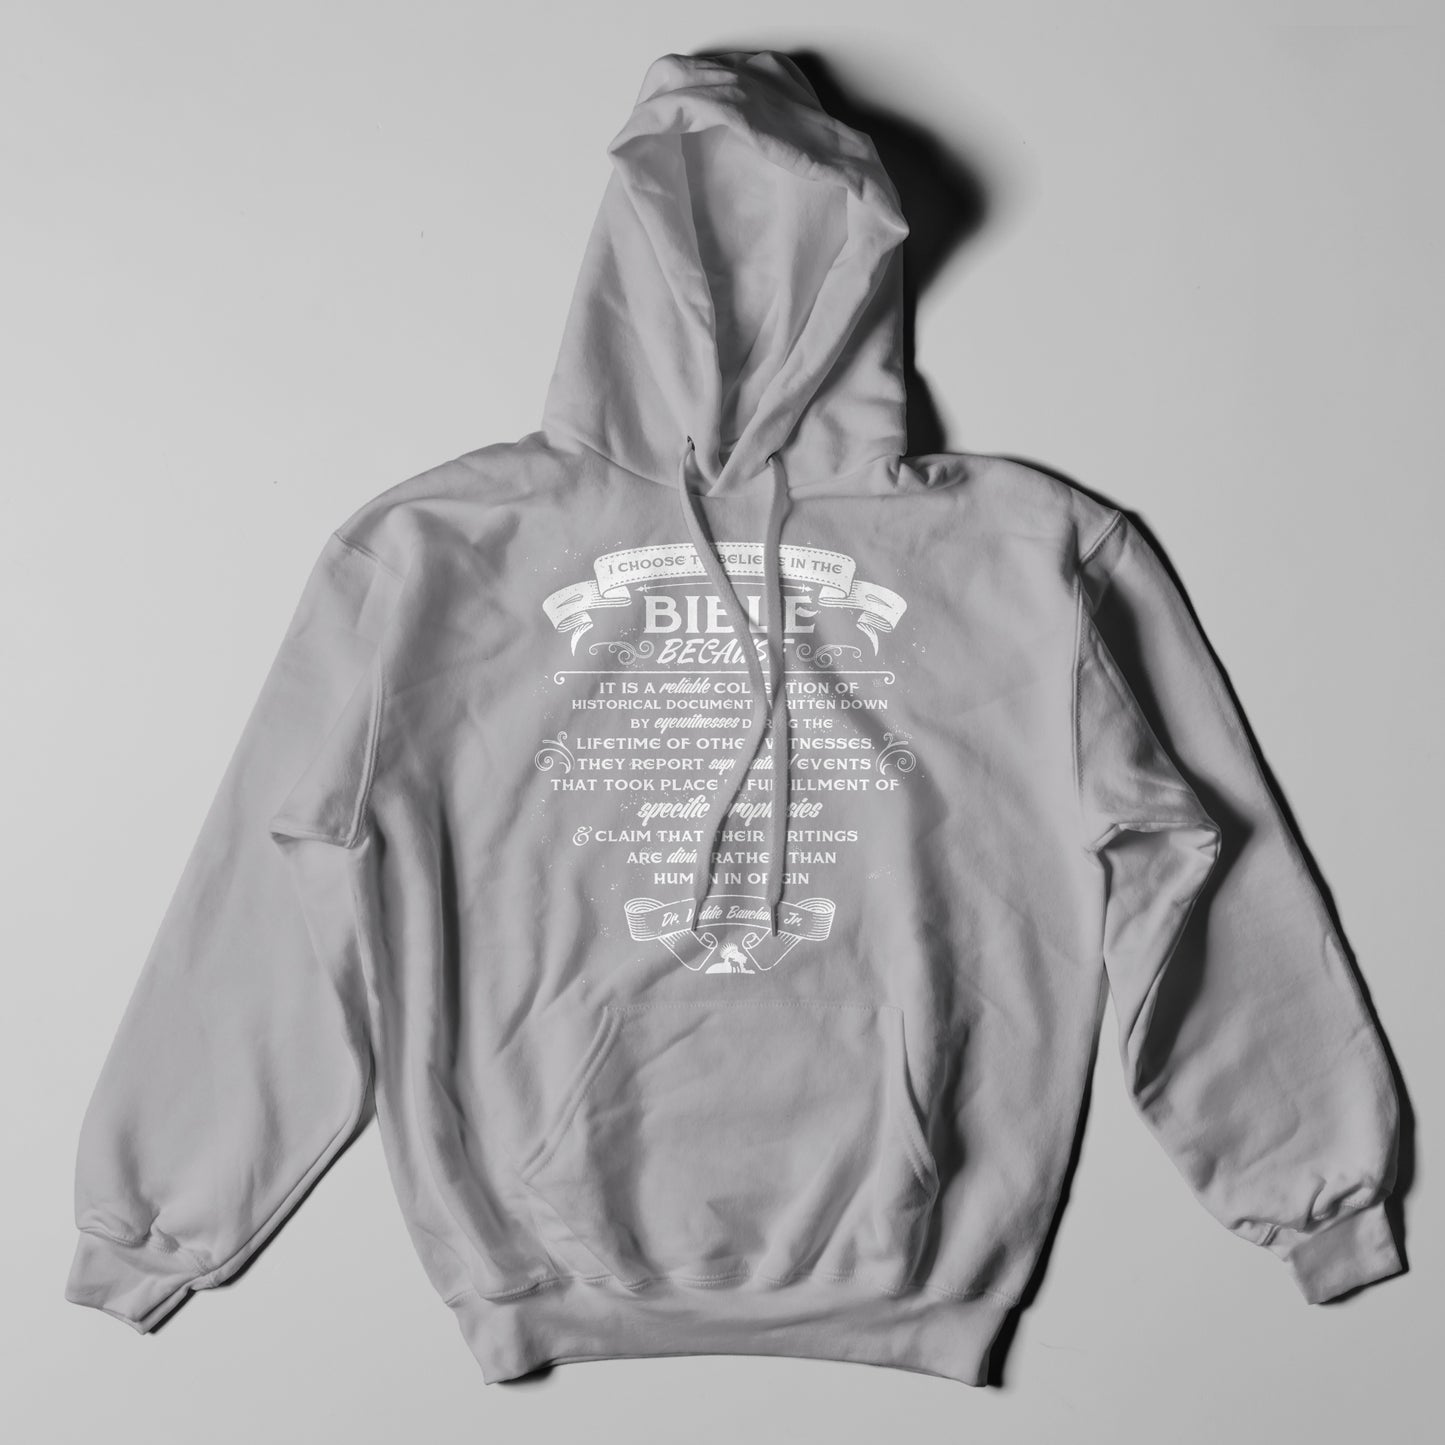 Why I Believe The Bible - Hoodie